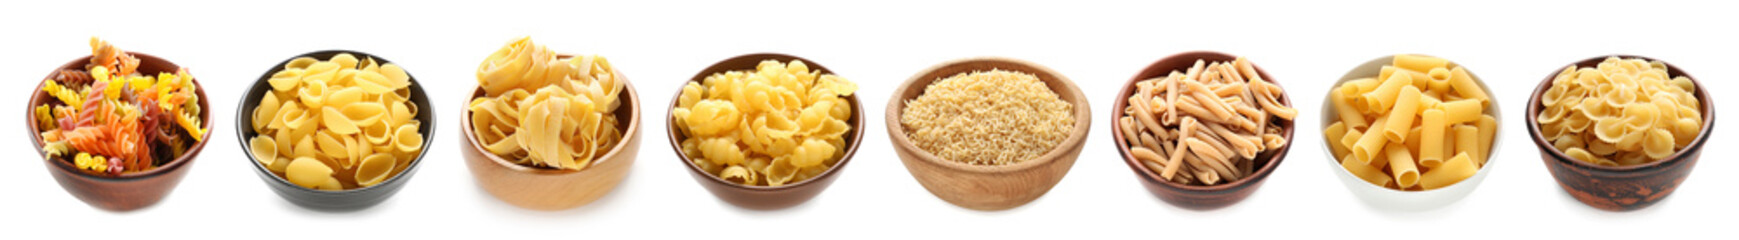 Collage of bowls with dry Italian pasta on white background